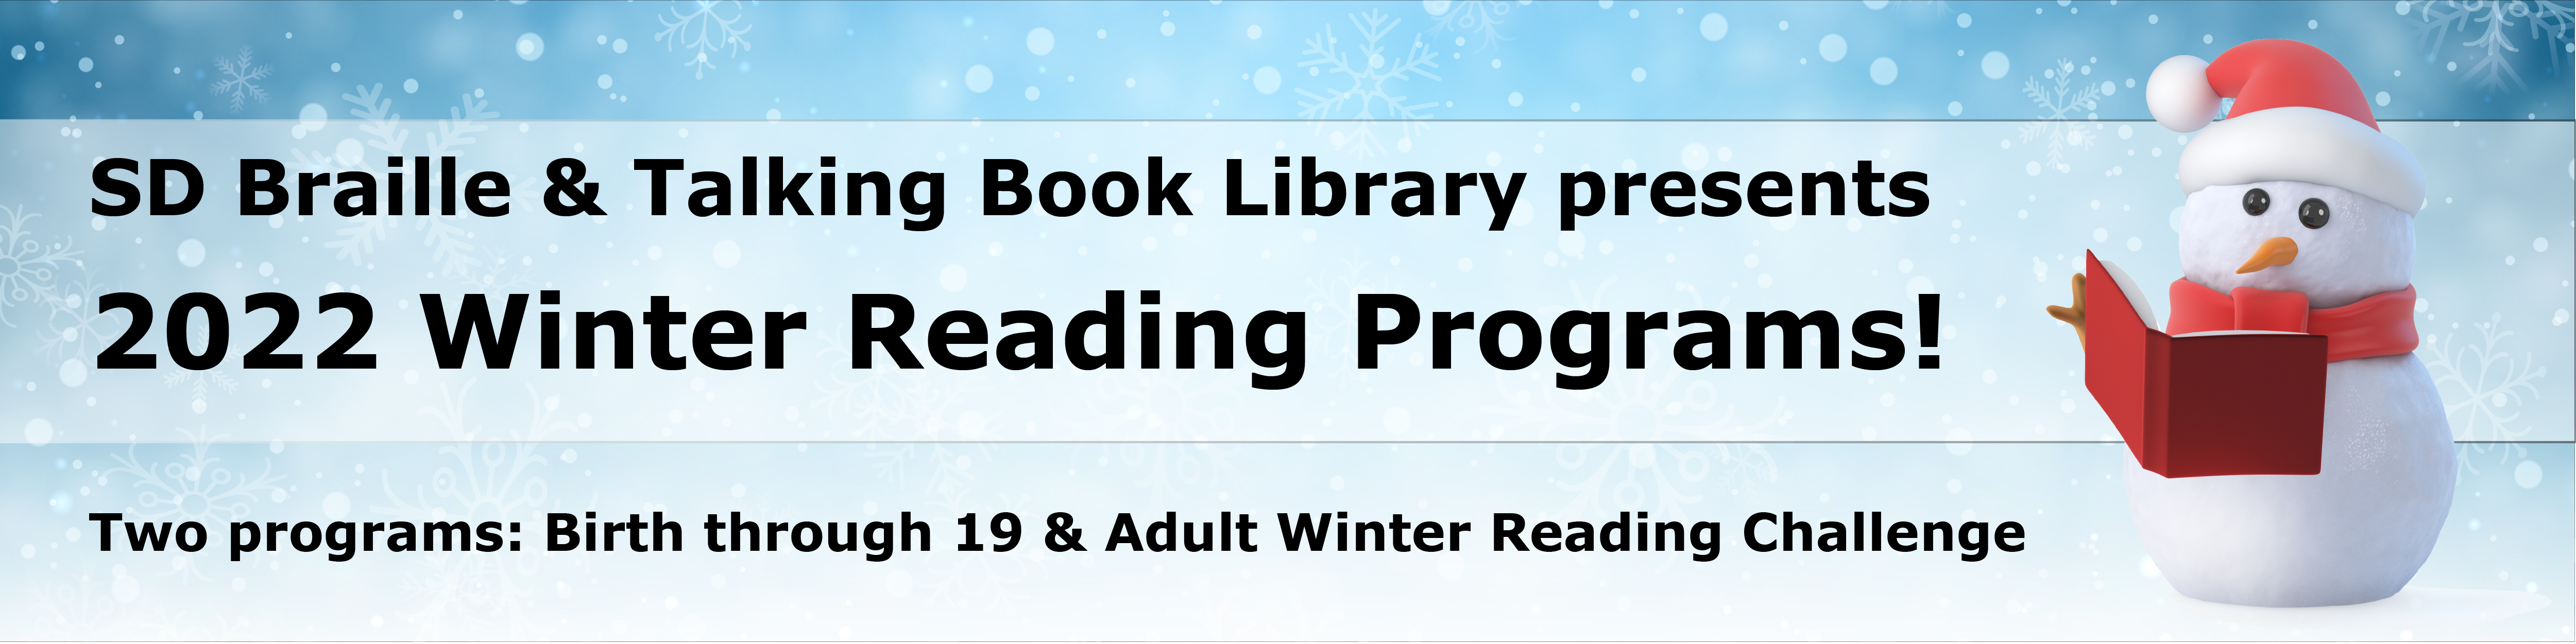 sd braille and talking booi library presents 2022 winter reading programs